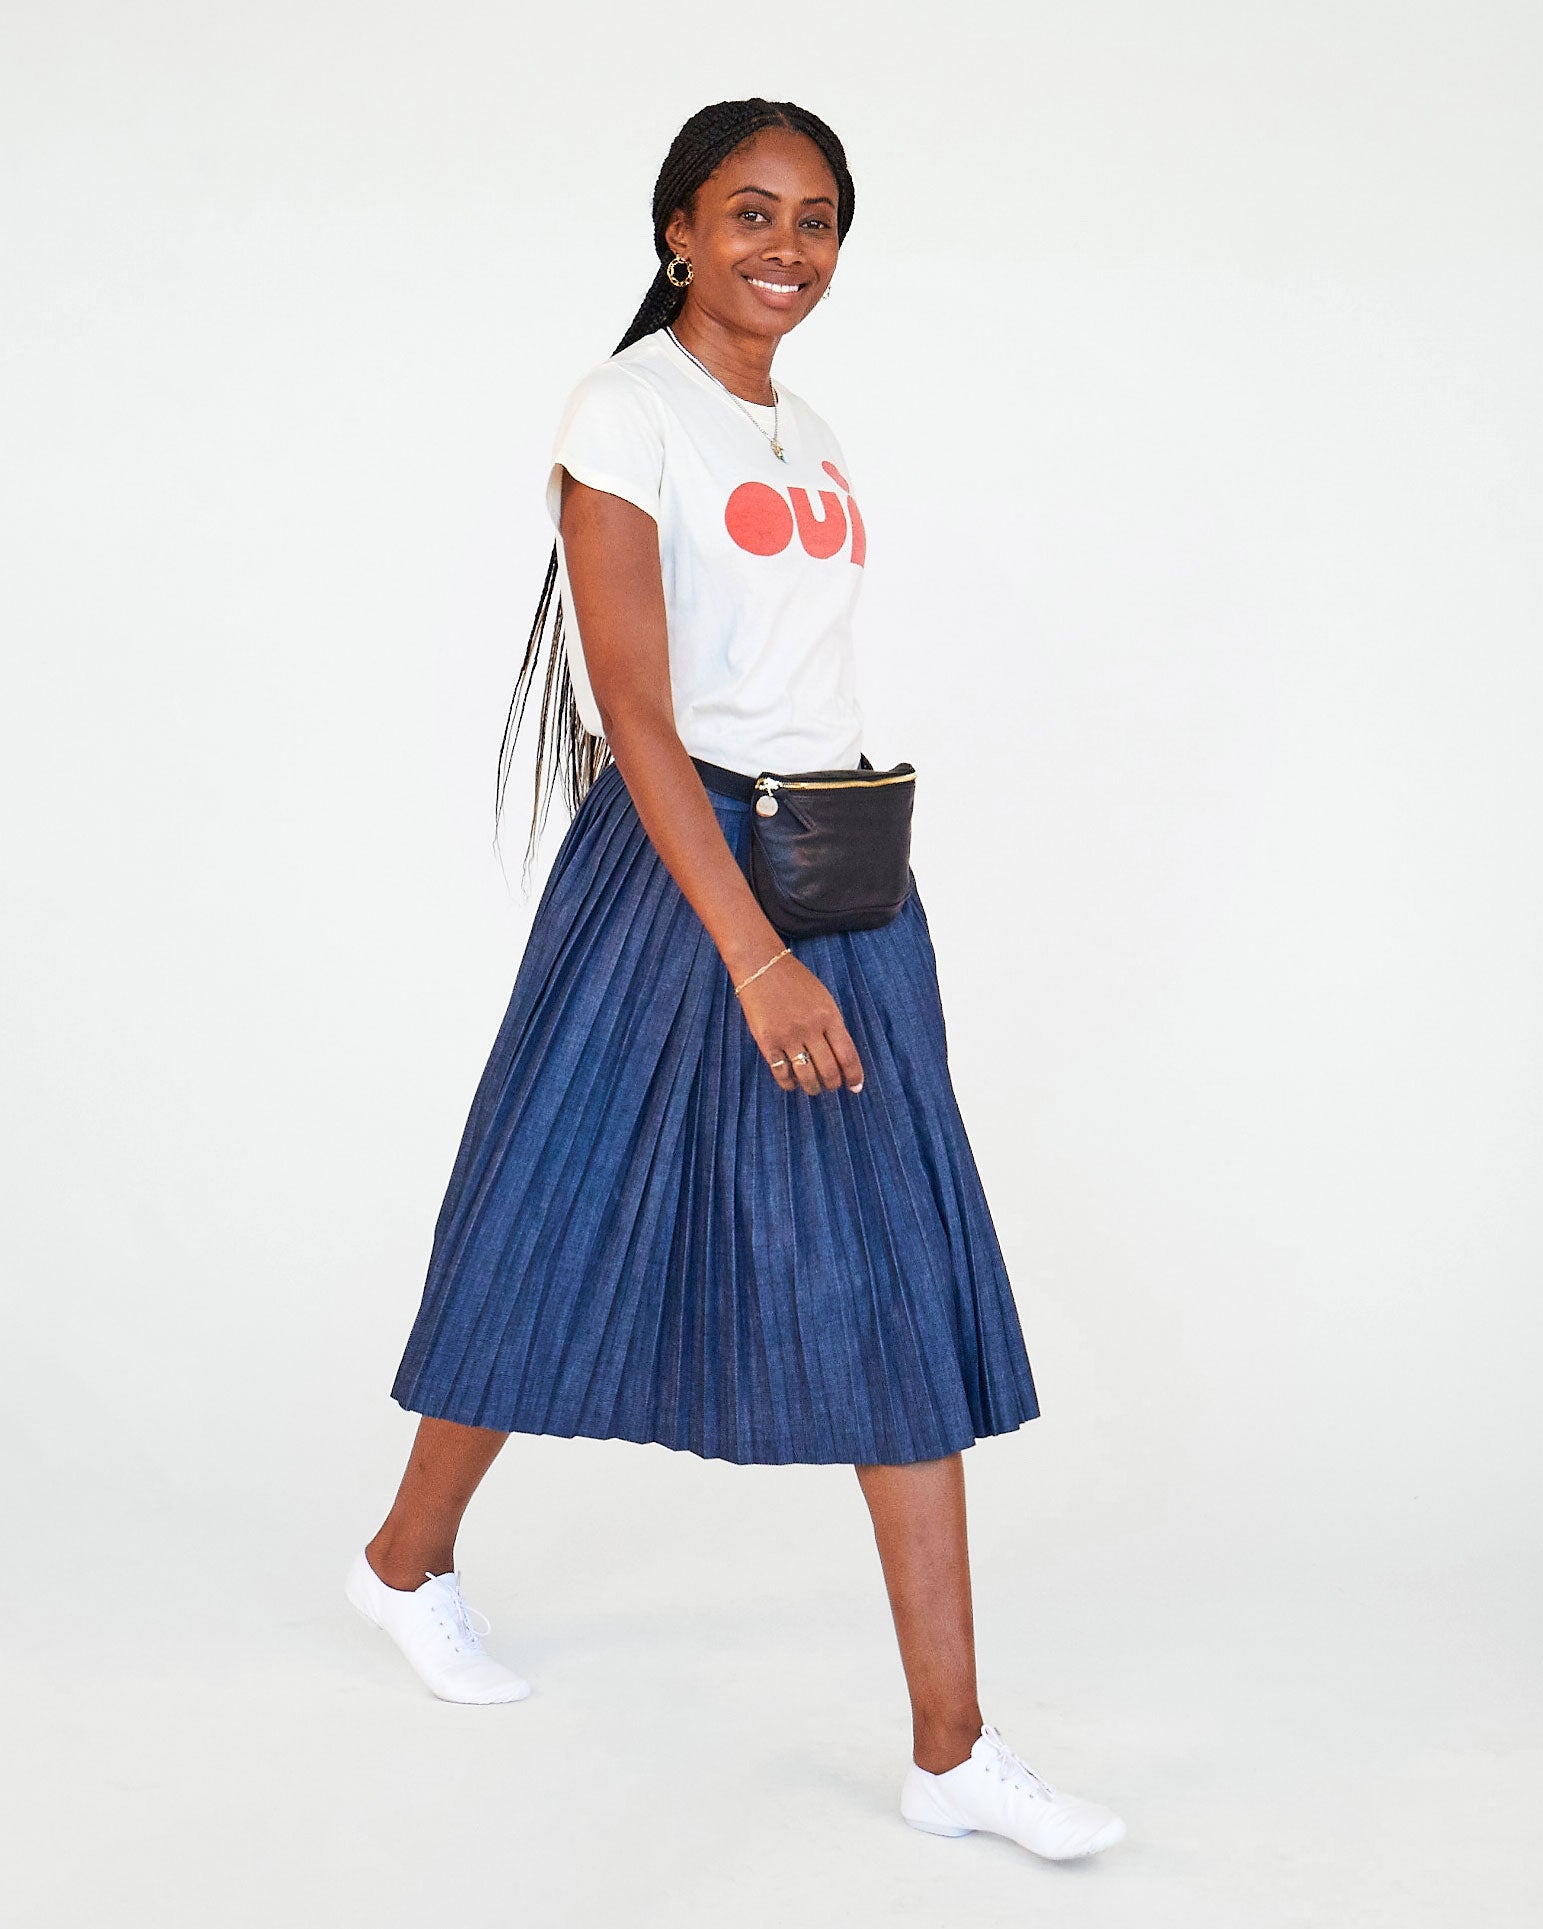 mecca in the Cream with Poppy Oui Classic Tee with a pleated navy skirt and the black fanny pack around her waist